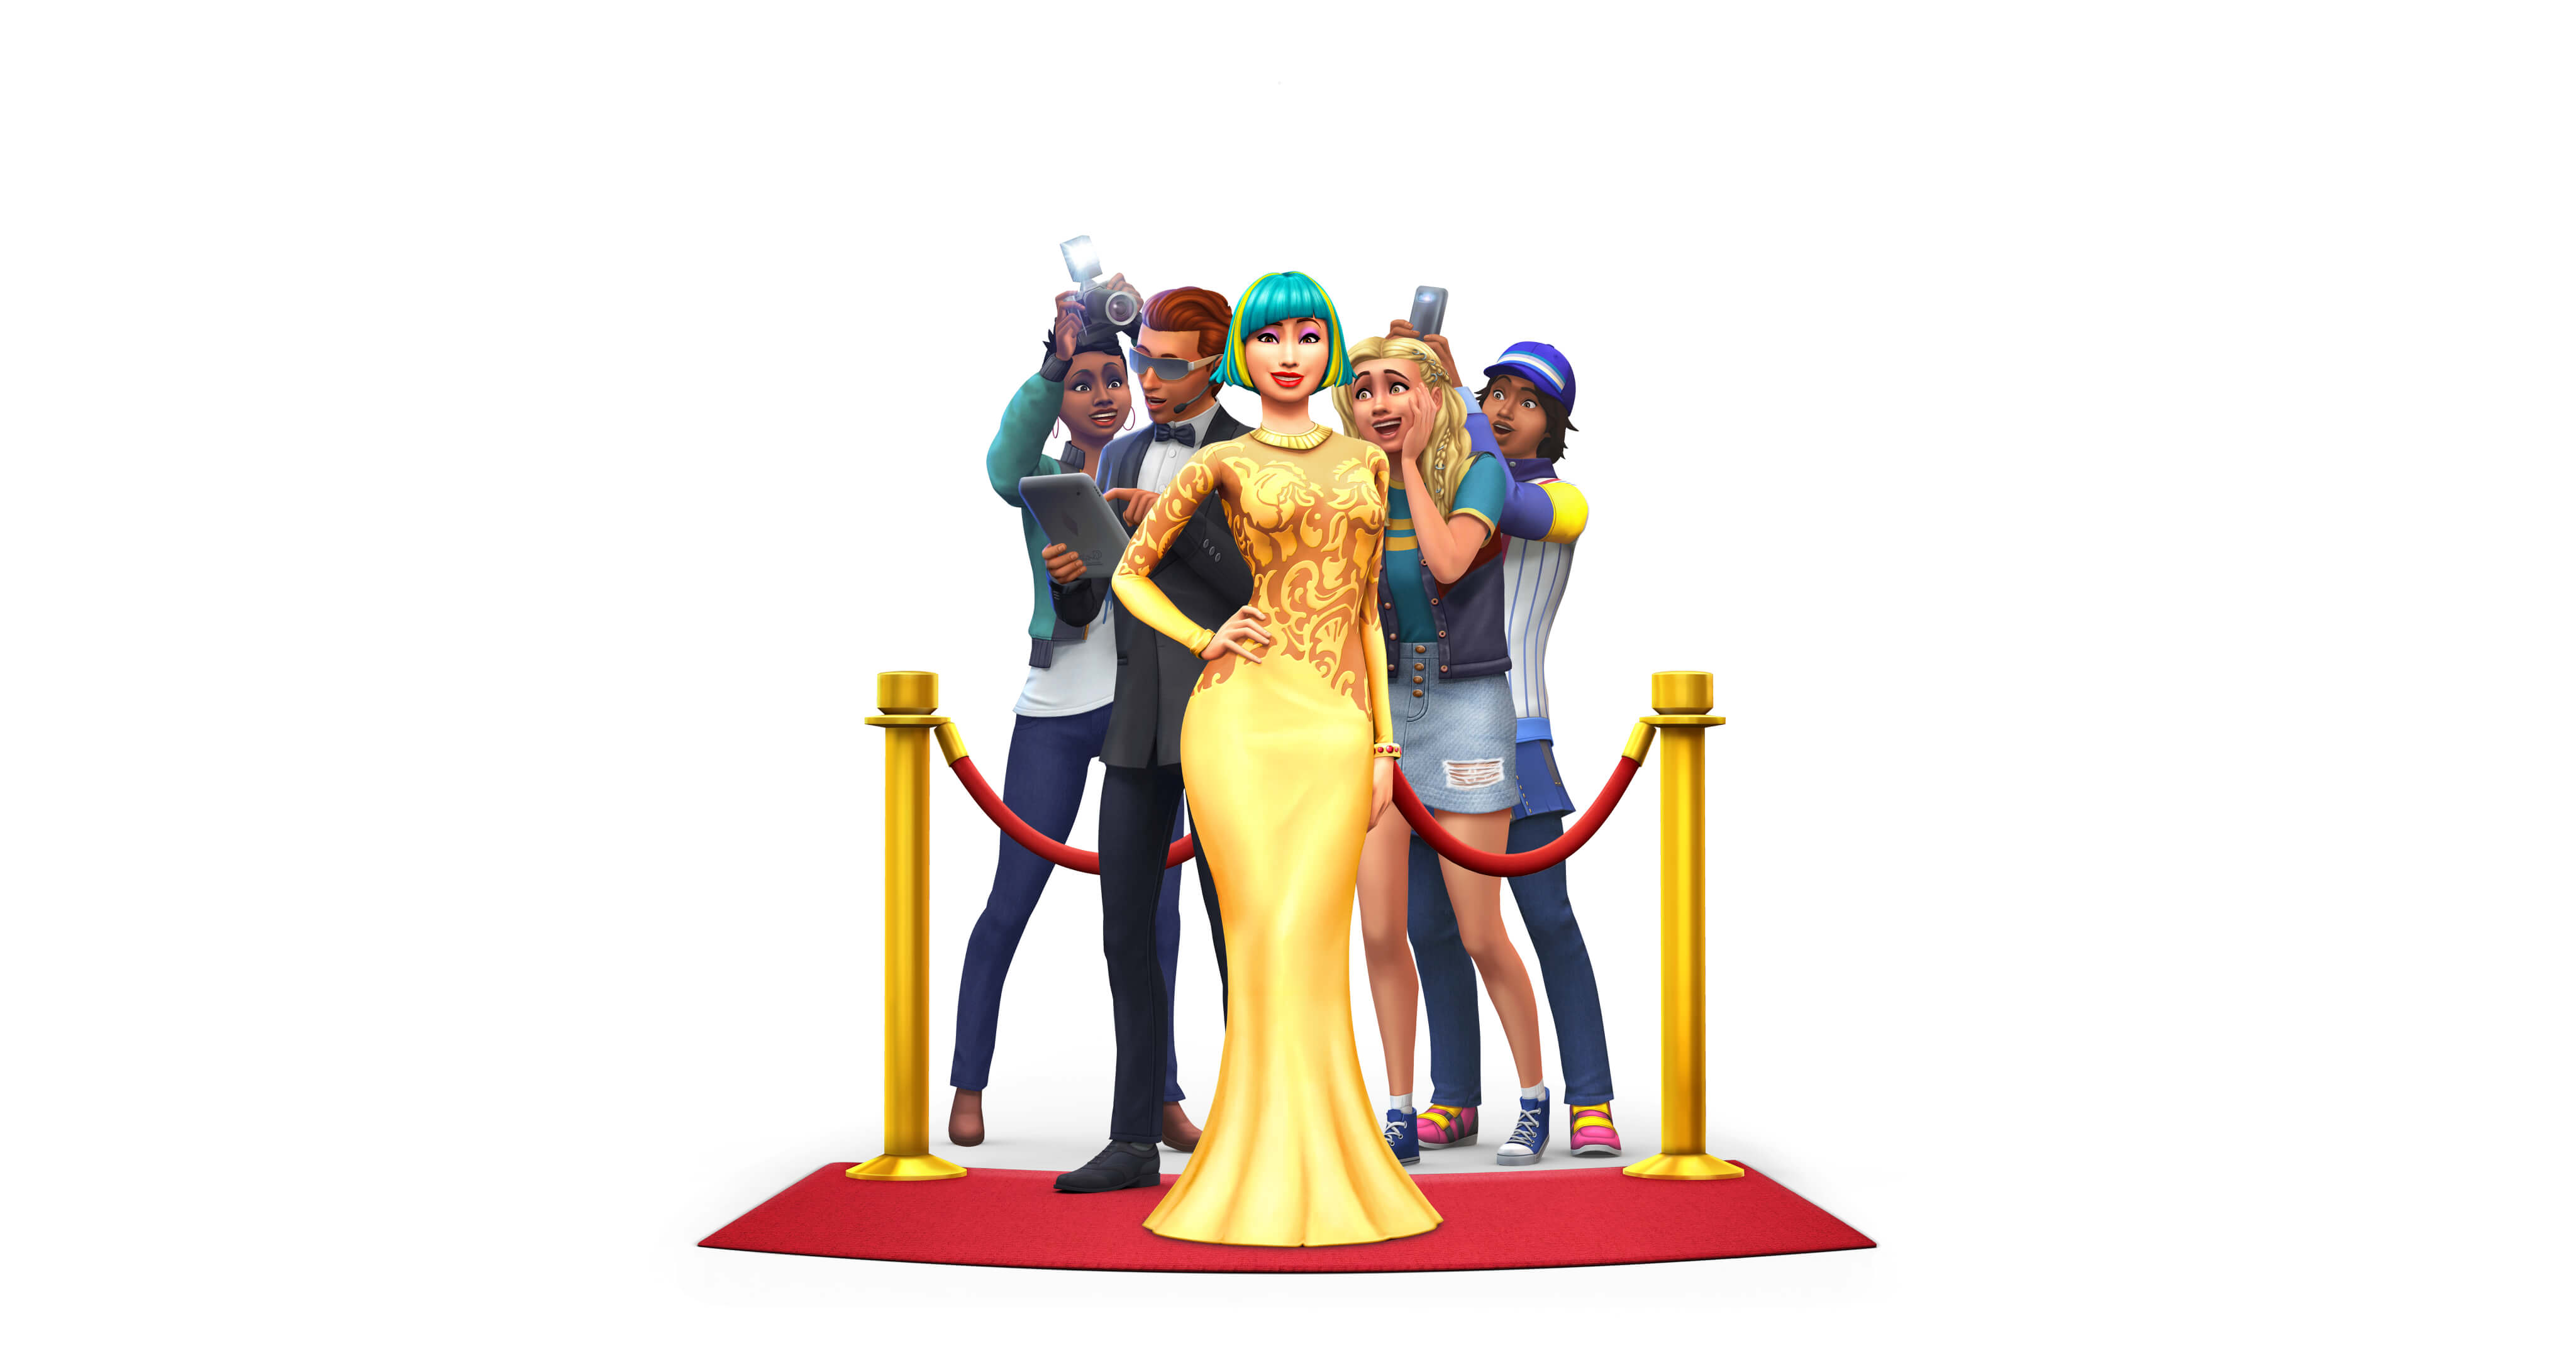 the sims 4 all expansions packs